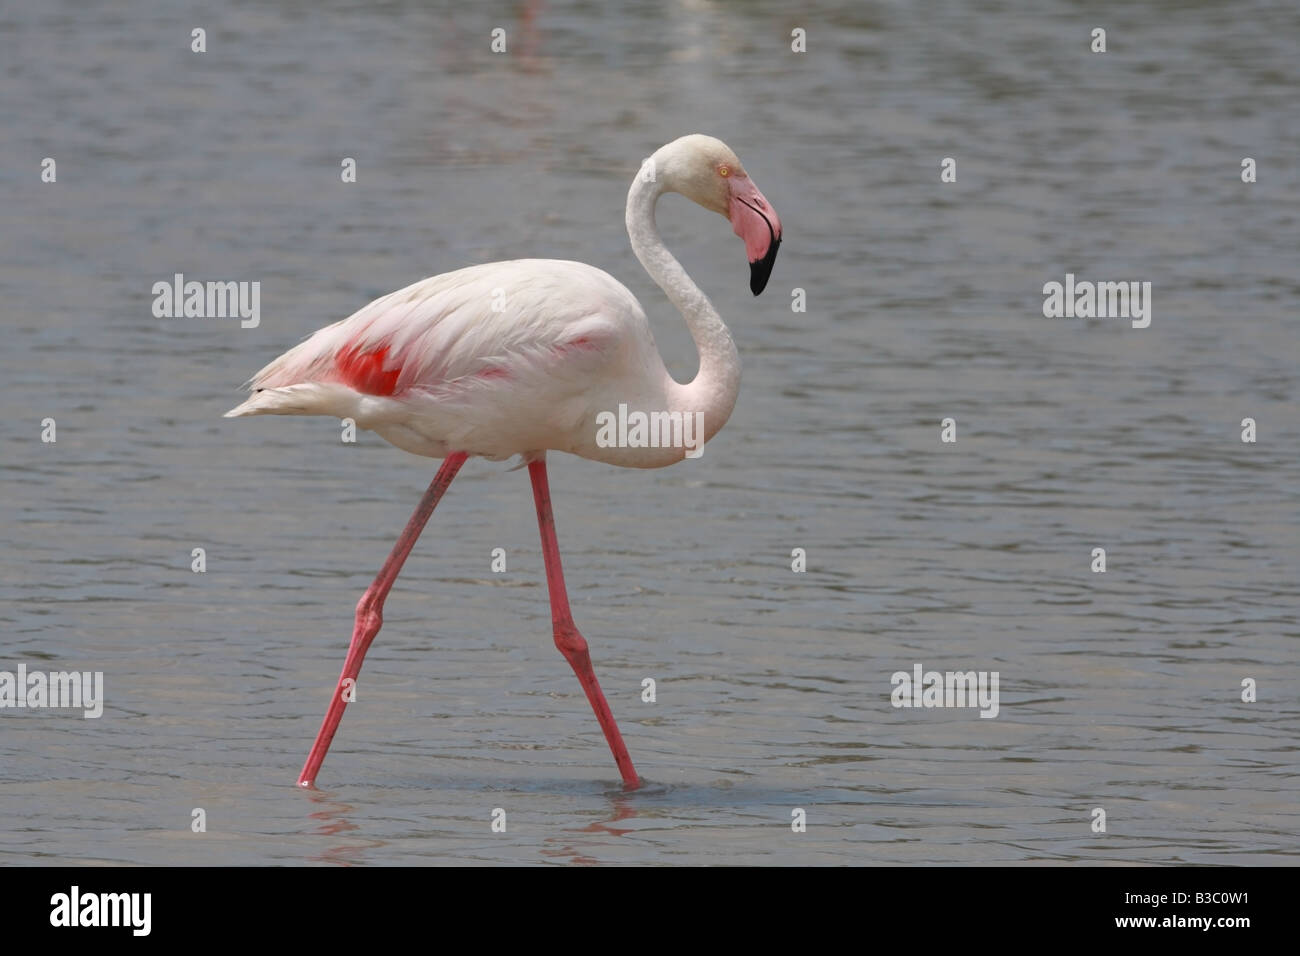 Flamant rose Phoenicopterus ruber Camargue France Banque D'Images